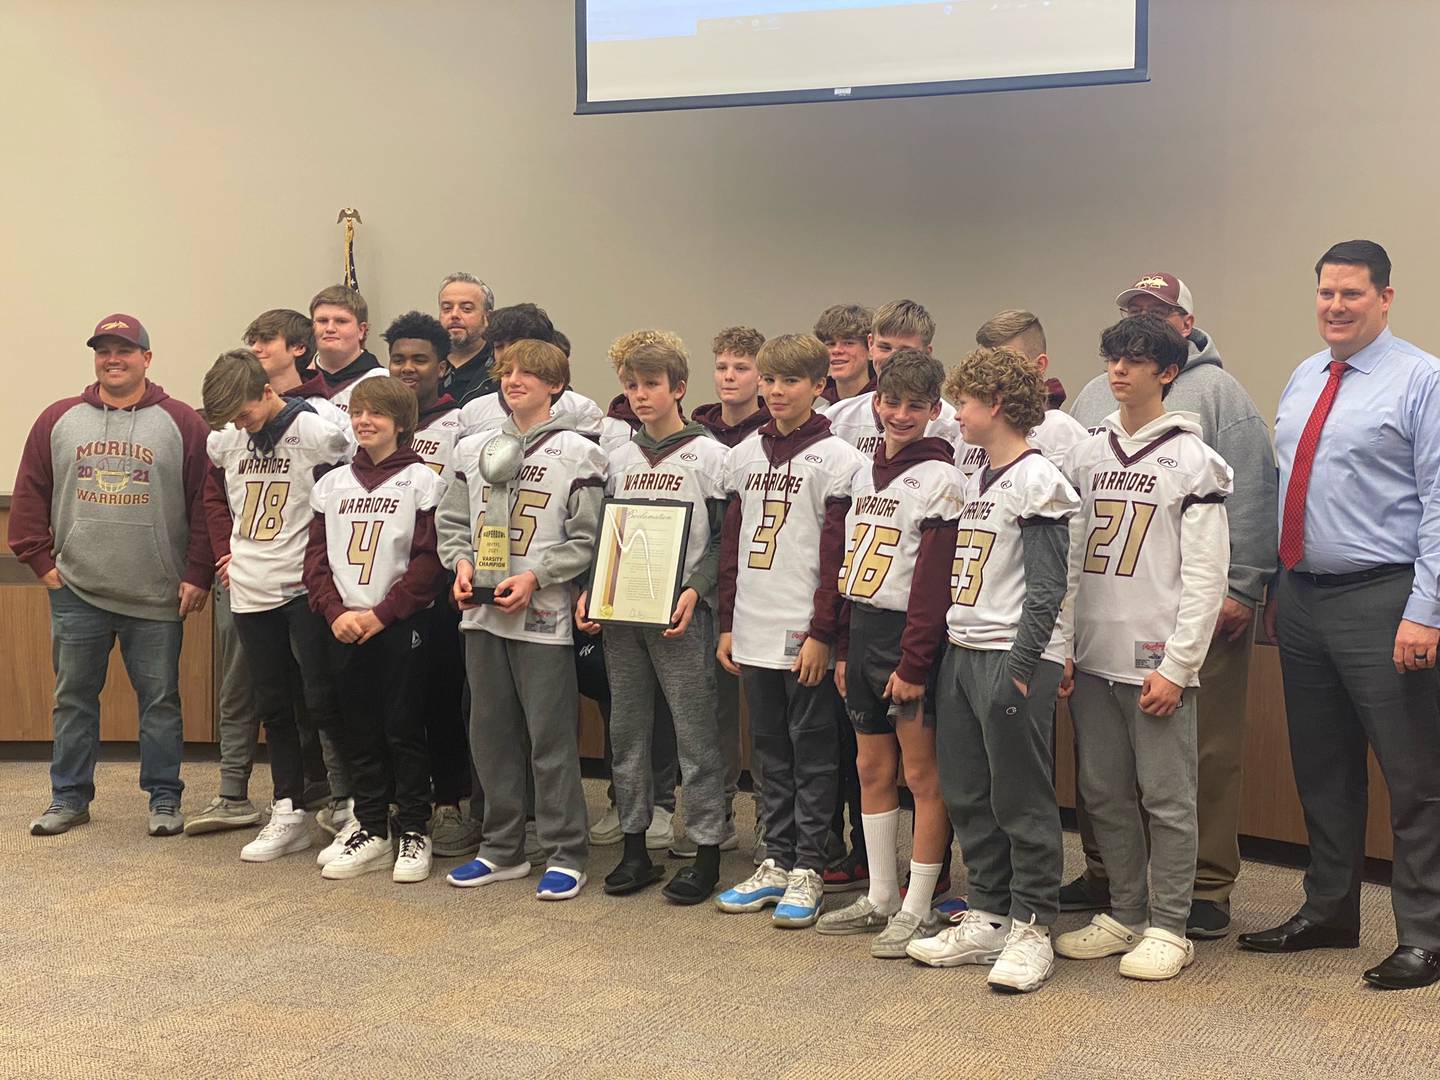 Morris Warriors Varsity team is recognized at the Monday's city council meeting.